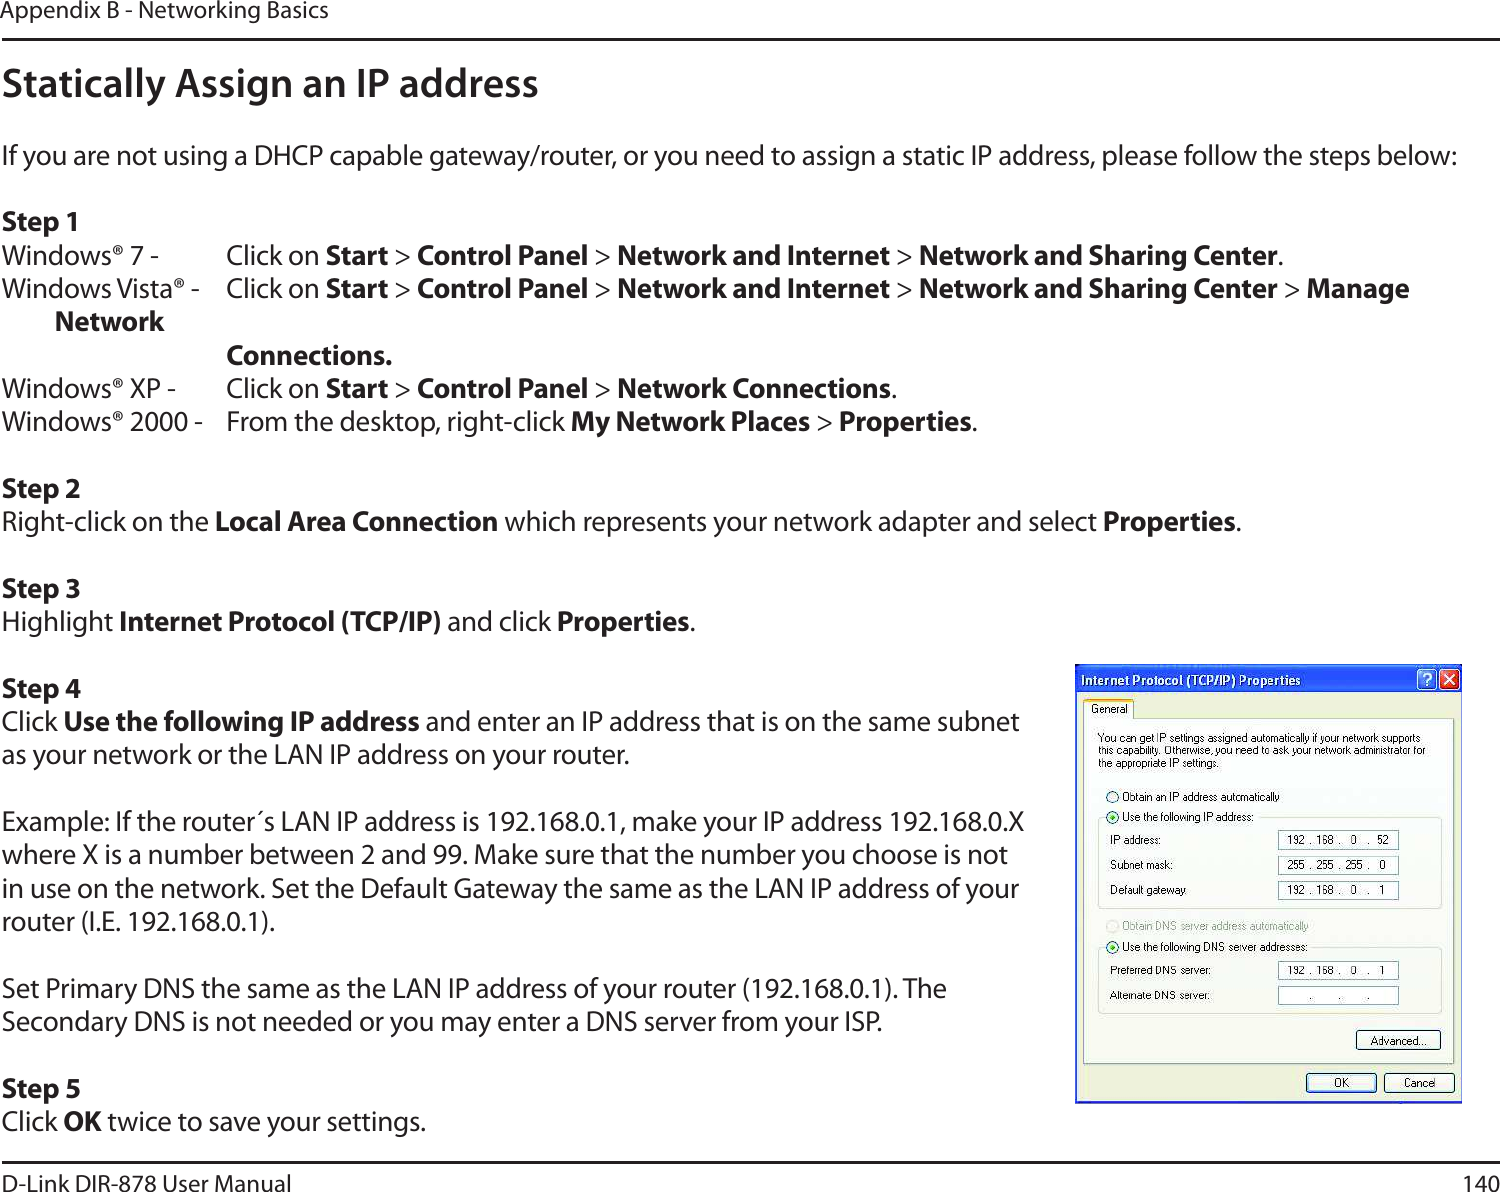 140D-Link DIR-878 User ManualAppendix B - Networking BasicsStatically Assign an IP addressIf you are not using a DHCP capable gateway/router, or you need to assign a static IP address, please follow the steps below:Step 1Windows® 7 - Click on Start &gt; Control Panel &gt; Network and Internet &gt; Network and Sharing Center.Windows Vista® - Click on Start &gt; Control Panel &gt; Network and Internet &gt; Network and Sharing Center &gt; Manage Network      Connections.Windows® XP - Click on Start &gt; Control Panel &gt; Network Connections.Windows® 2000 - From the desktop, right-click My Network Places &gt; Properties.Step 2Right-click on the -PDBM&quot;SFB$POOFDUJPO which represents your network adapter and select Properties.Step 3Highlight *OUFSOFU1SPUPDPM5$1*1 and click Properties.Step 4Click Use the following IP address and enter an IP address that is on the same subnet as your network or the LAN IP address on your router. Example: If the router´s LAN IP address is 192.168.0.1, make your IP address 192.168.0.X where X is a number between 2 and 99. Make sure that the number you choose is not in use on the network. Set the Default Gateway the same as the LAN IP address of your router (I.E. 192.168.0.1). Set Primary DNS the same as the LAN IP address of your router (192.168.0.1). The Secondary DNS is not needed or you may enter a DNS server from your ISP.Step 5Click OK twice to save your settings.